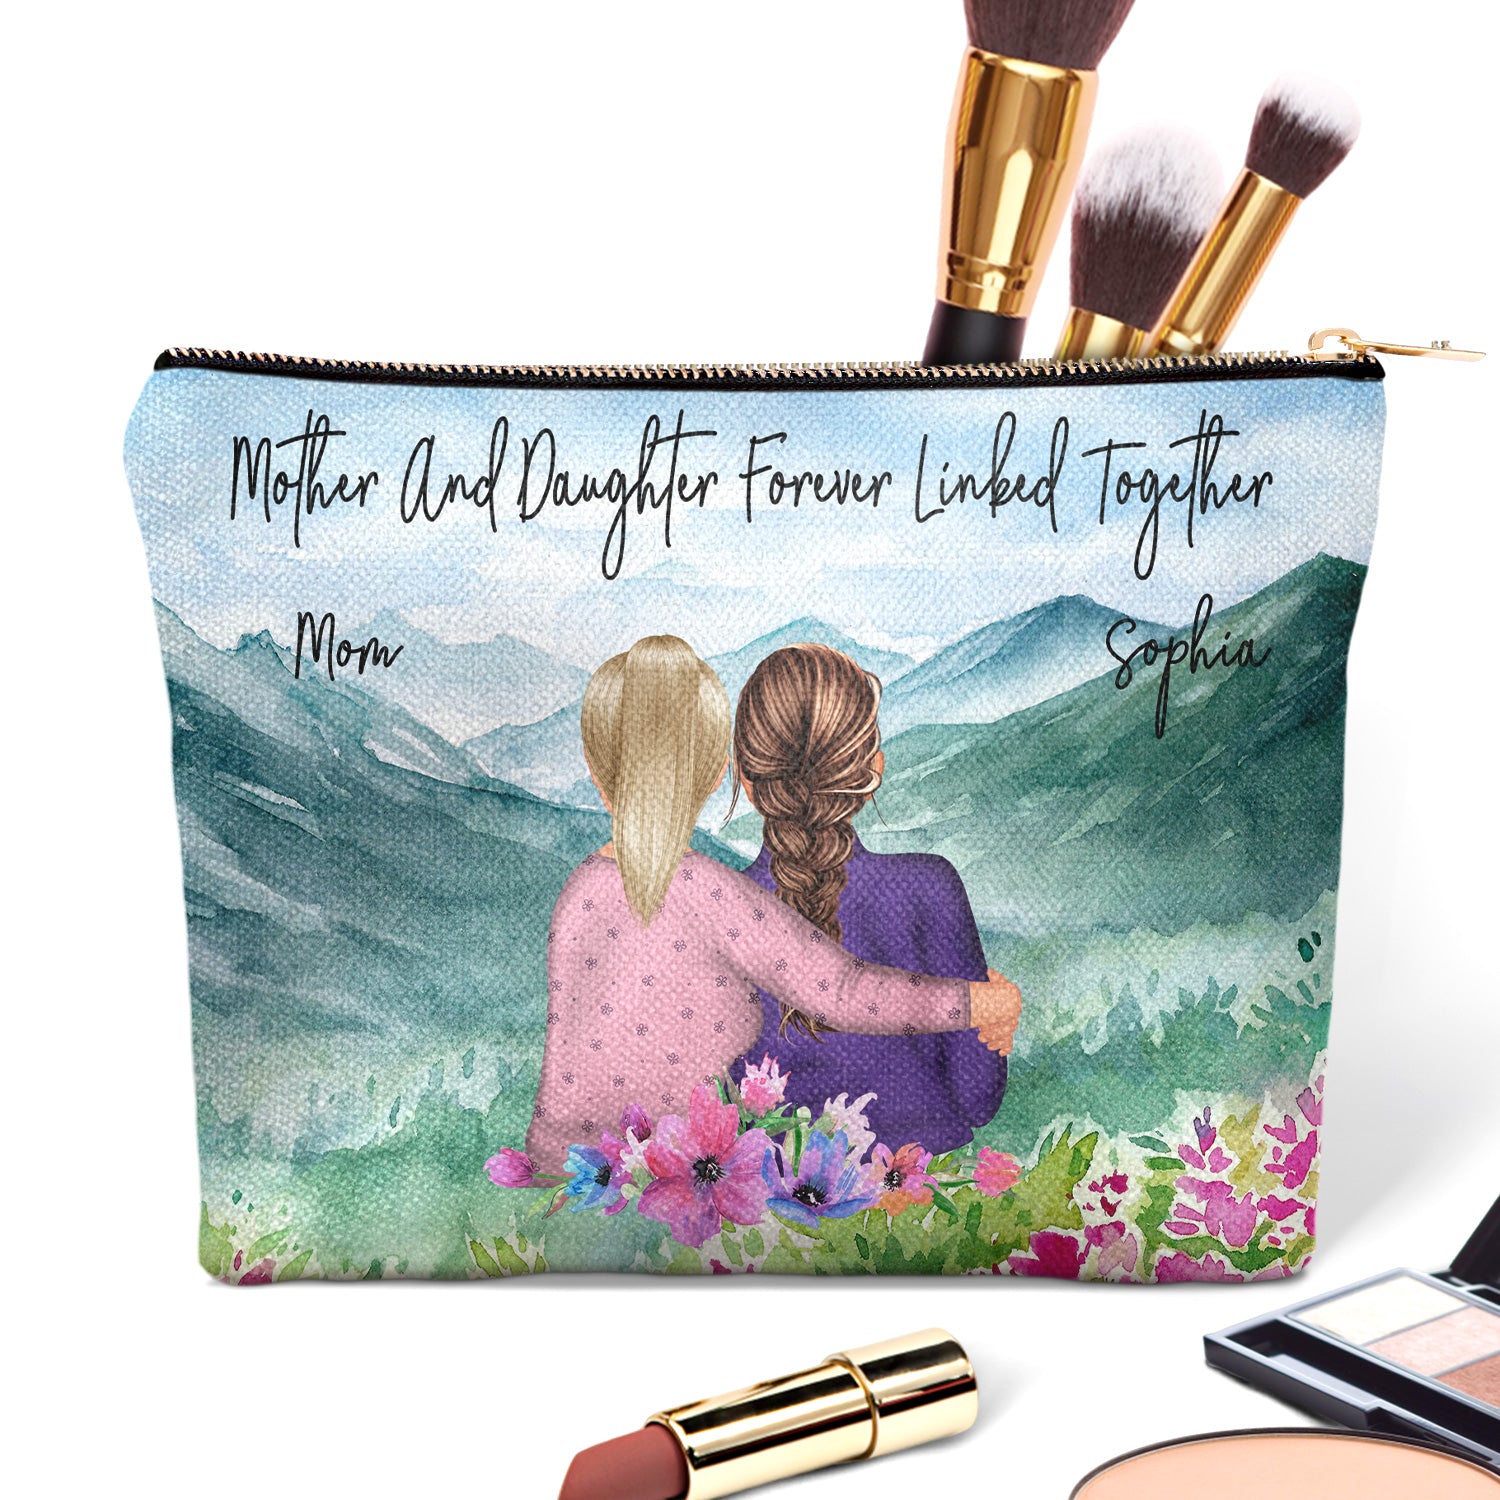 Mother & Daughter Forever Linked Together Watercolor Style - Gift For Mom, Grandma, Grandmother, Granddaughter - Personalized Cosmetic Bag